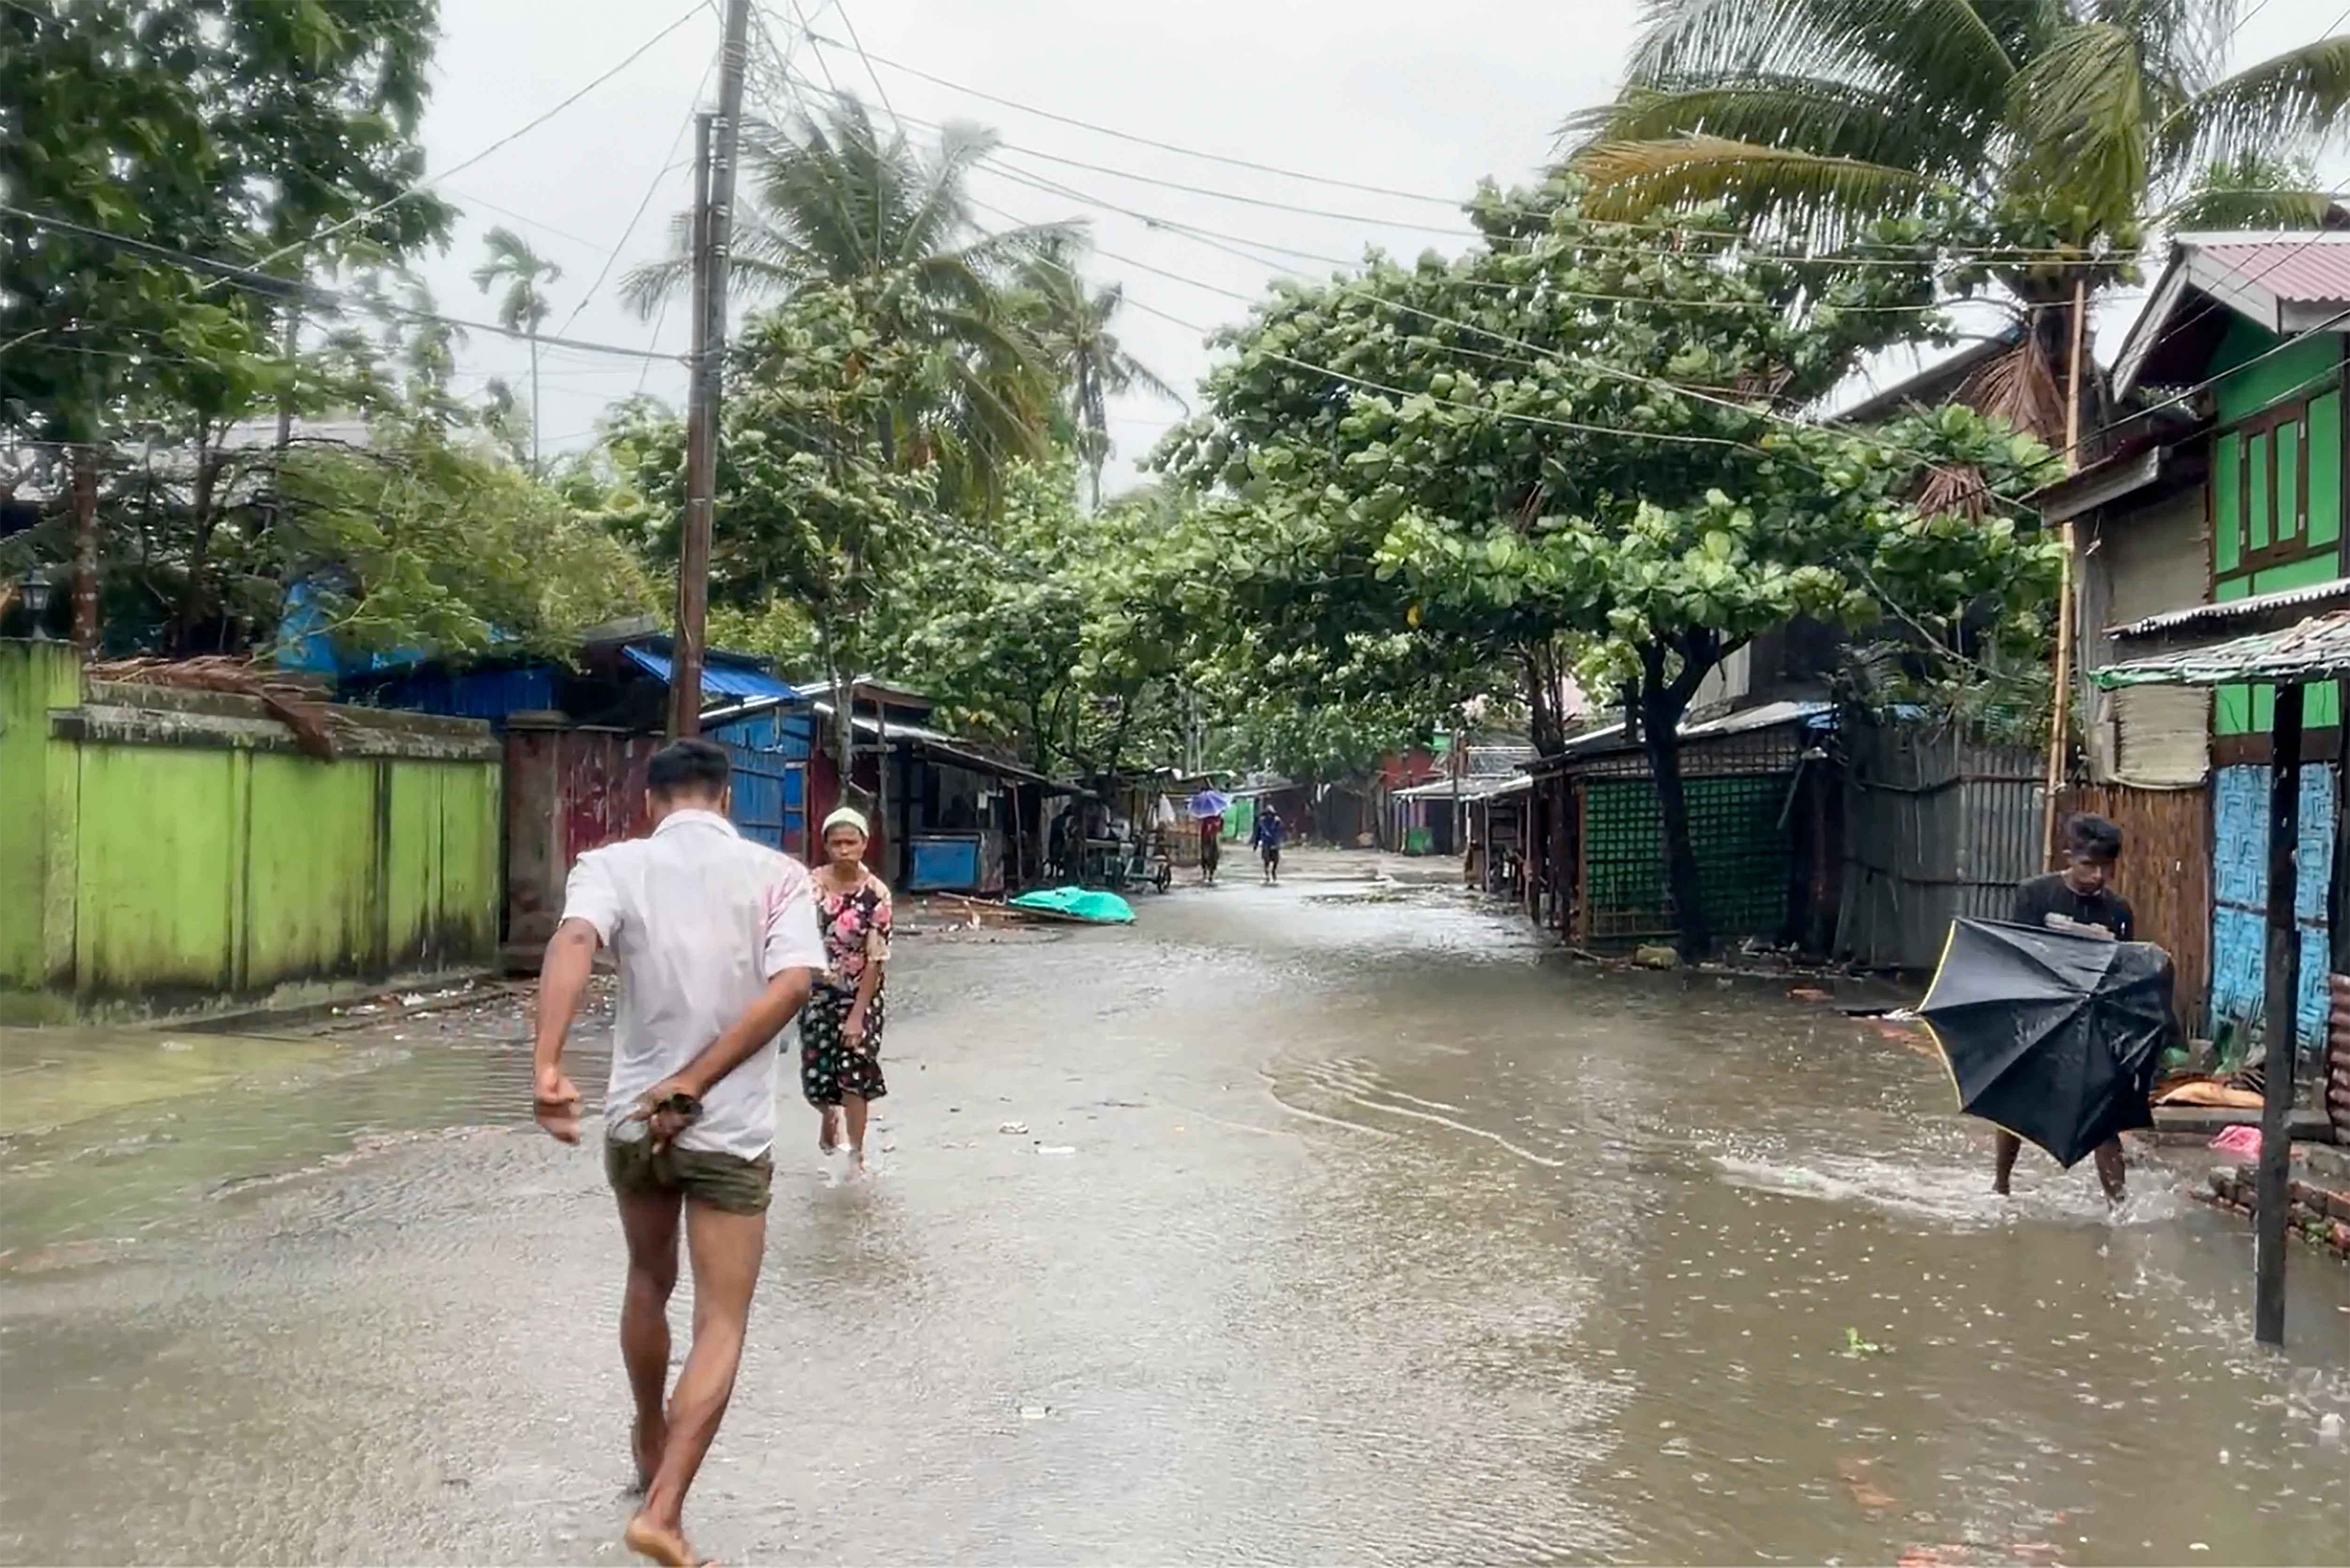 local people walk on a flooded street caused by heavy rain